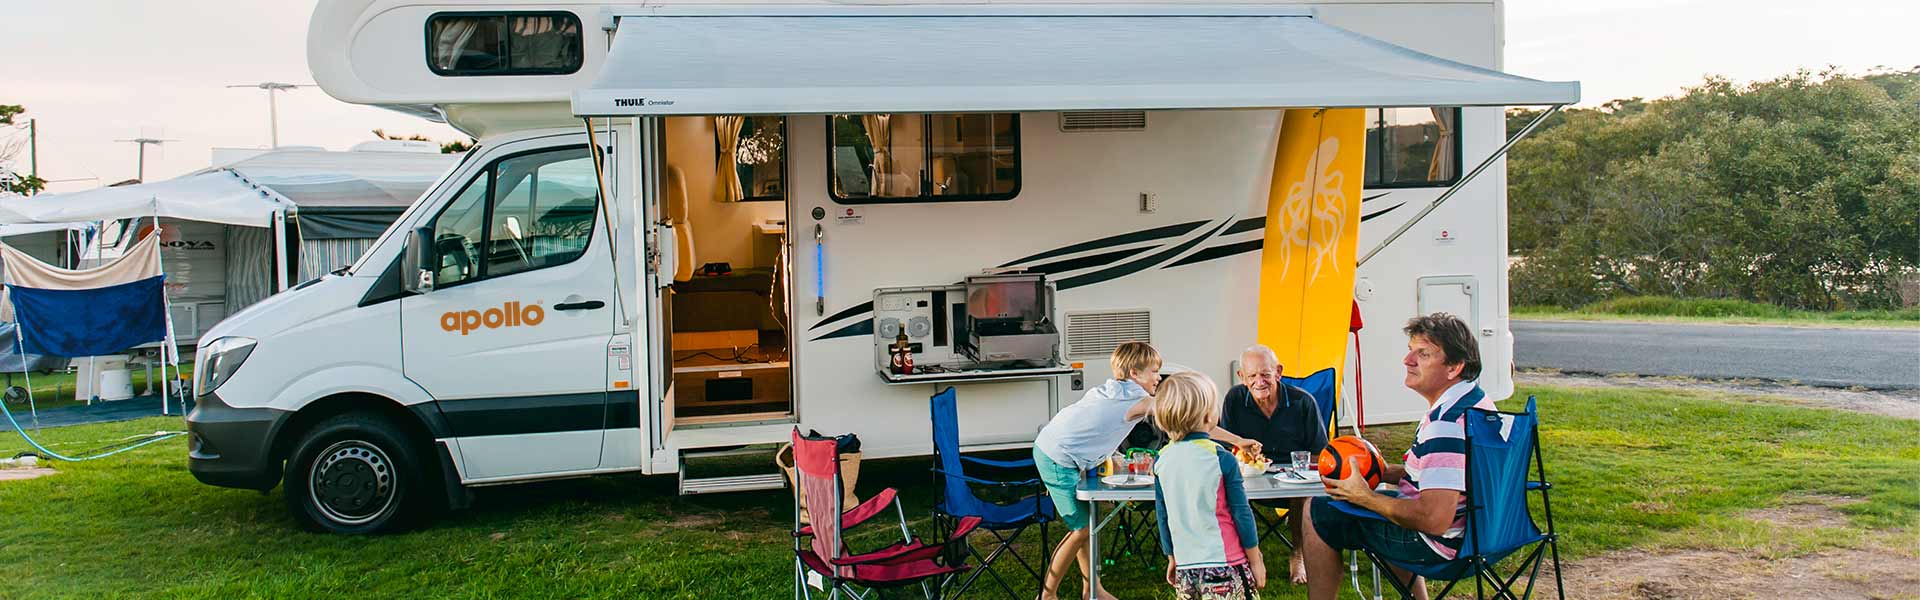 family sitting in front of campervan 